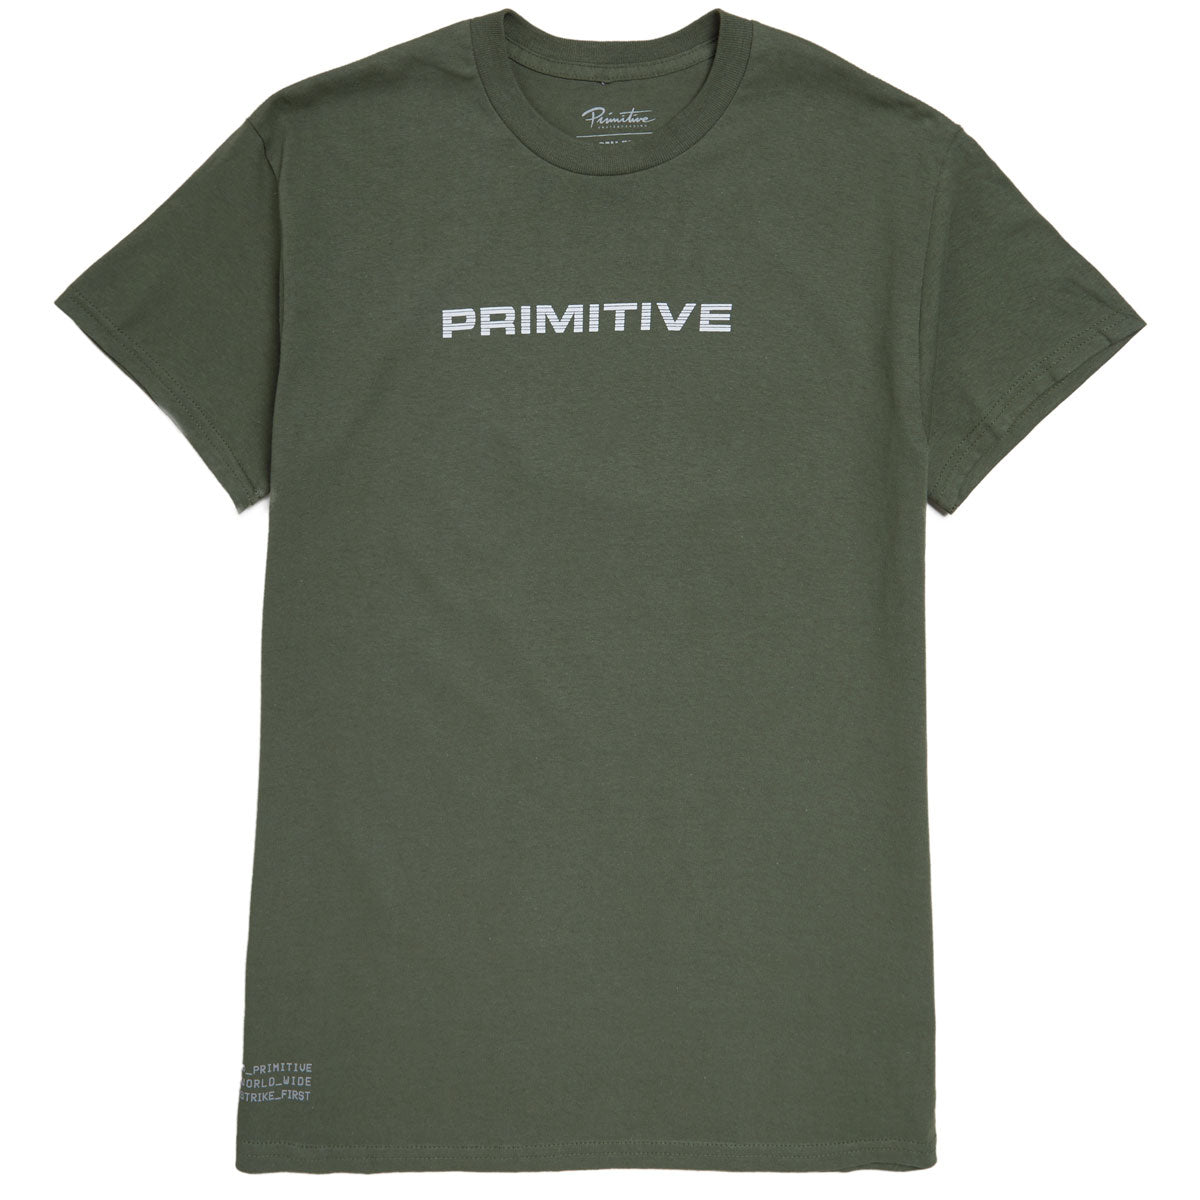 Primitive x Call Of Duty Ghost T-Shirt - Military Green image 3